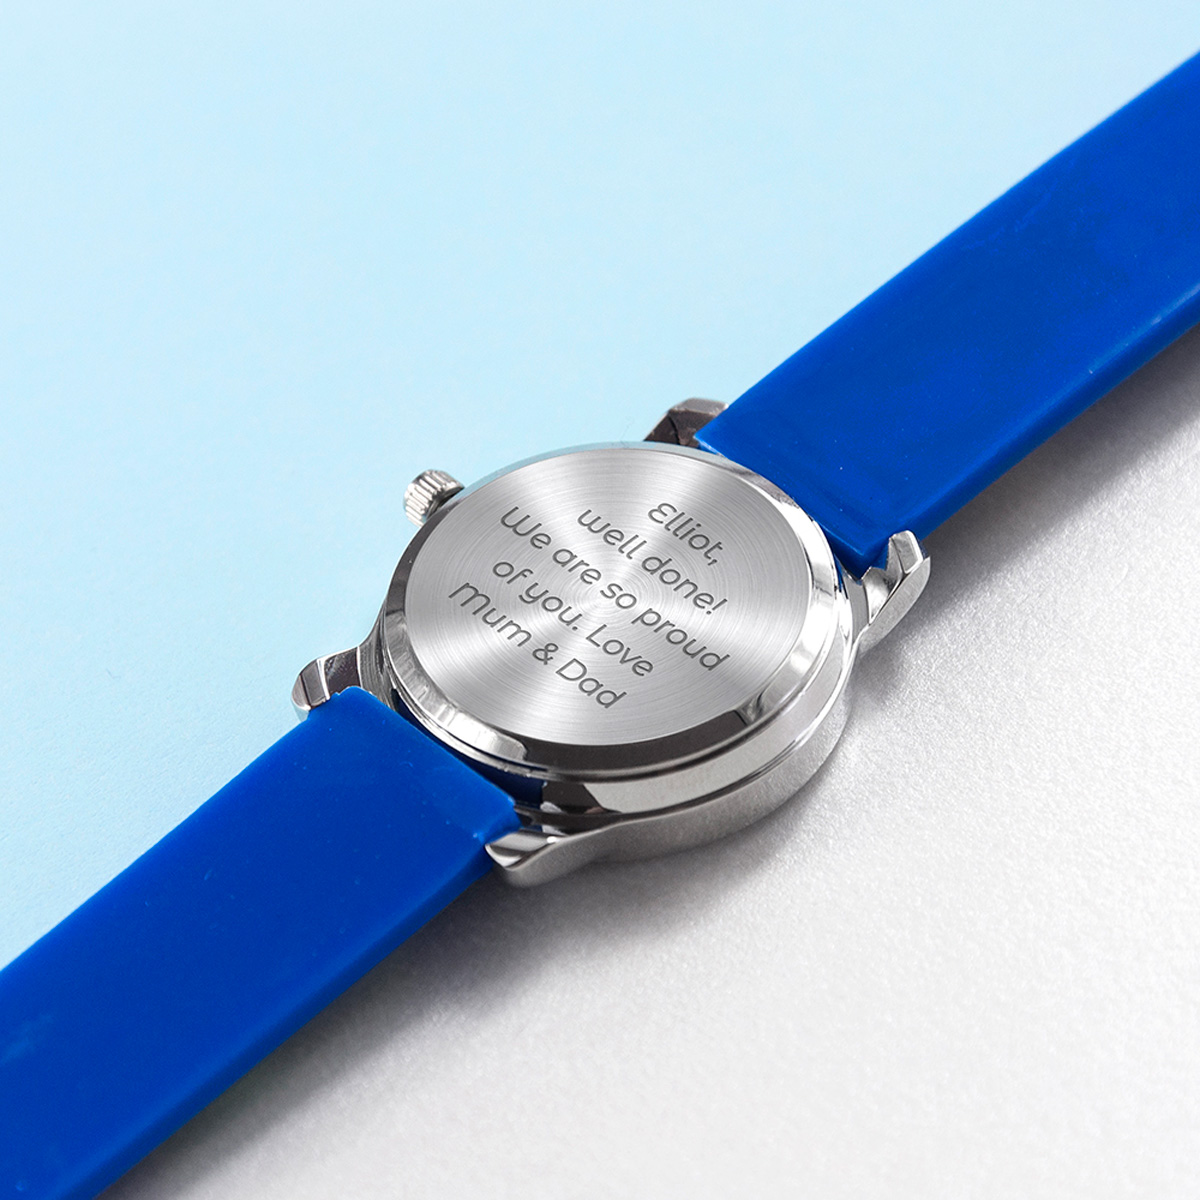 Personalised Children's Blue Football Watch